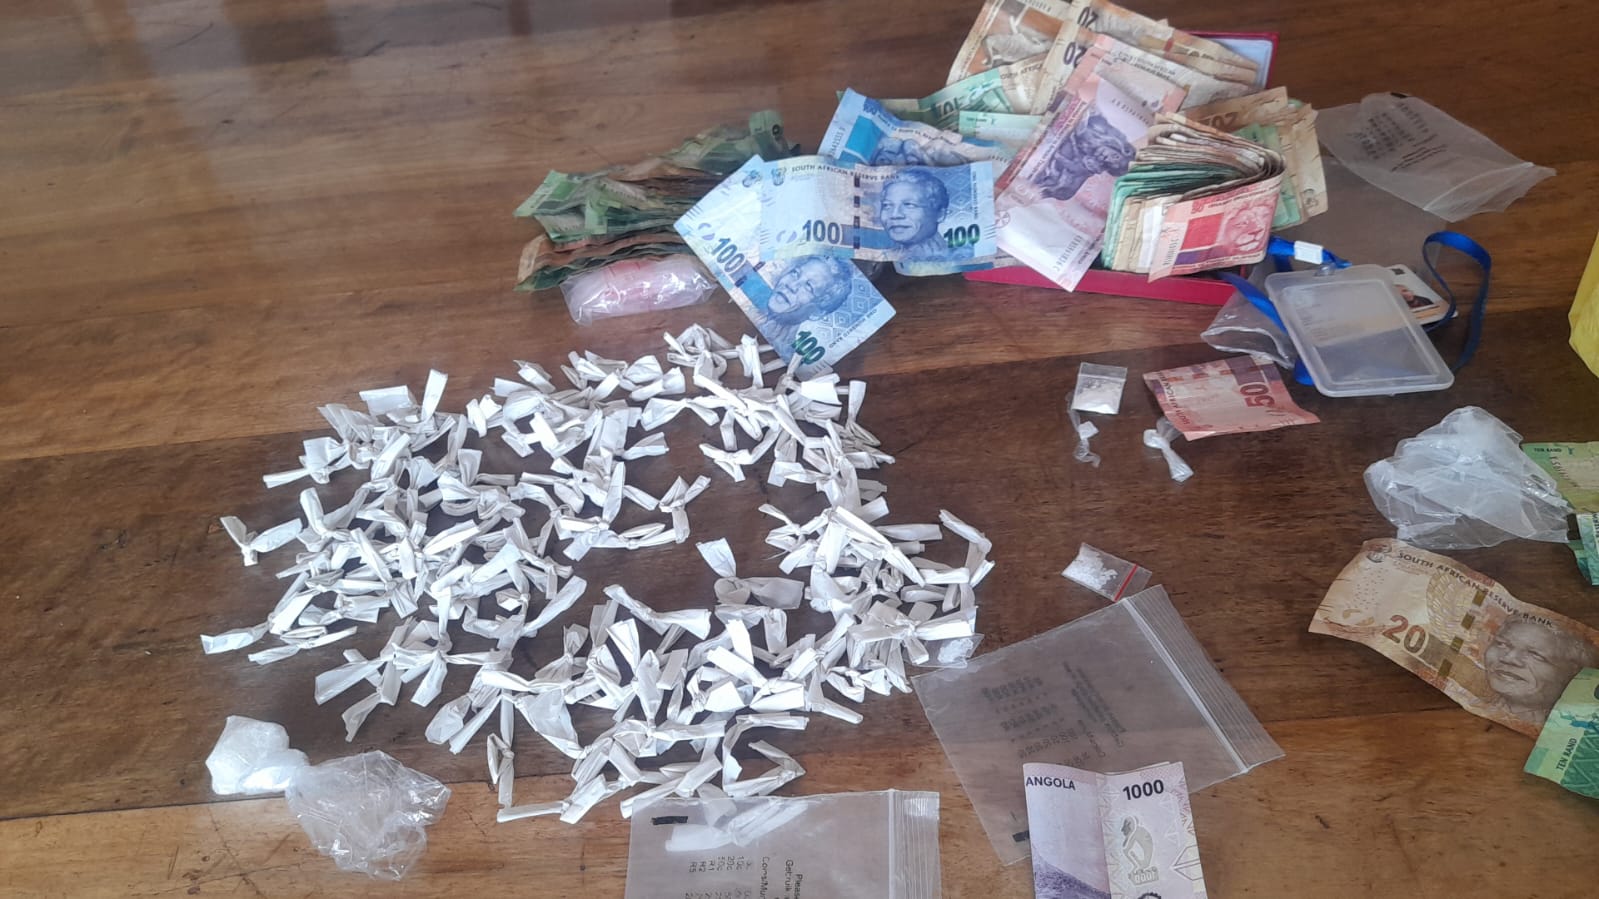 Suspect arrested for possession of suspected drugs and suspected stolen properties